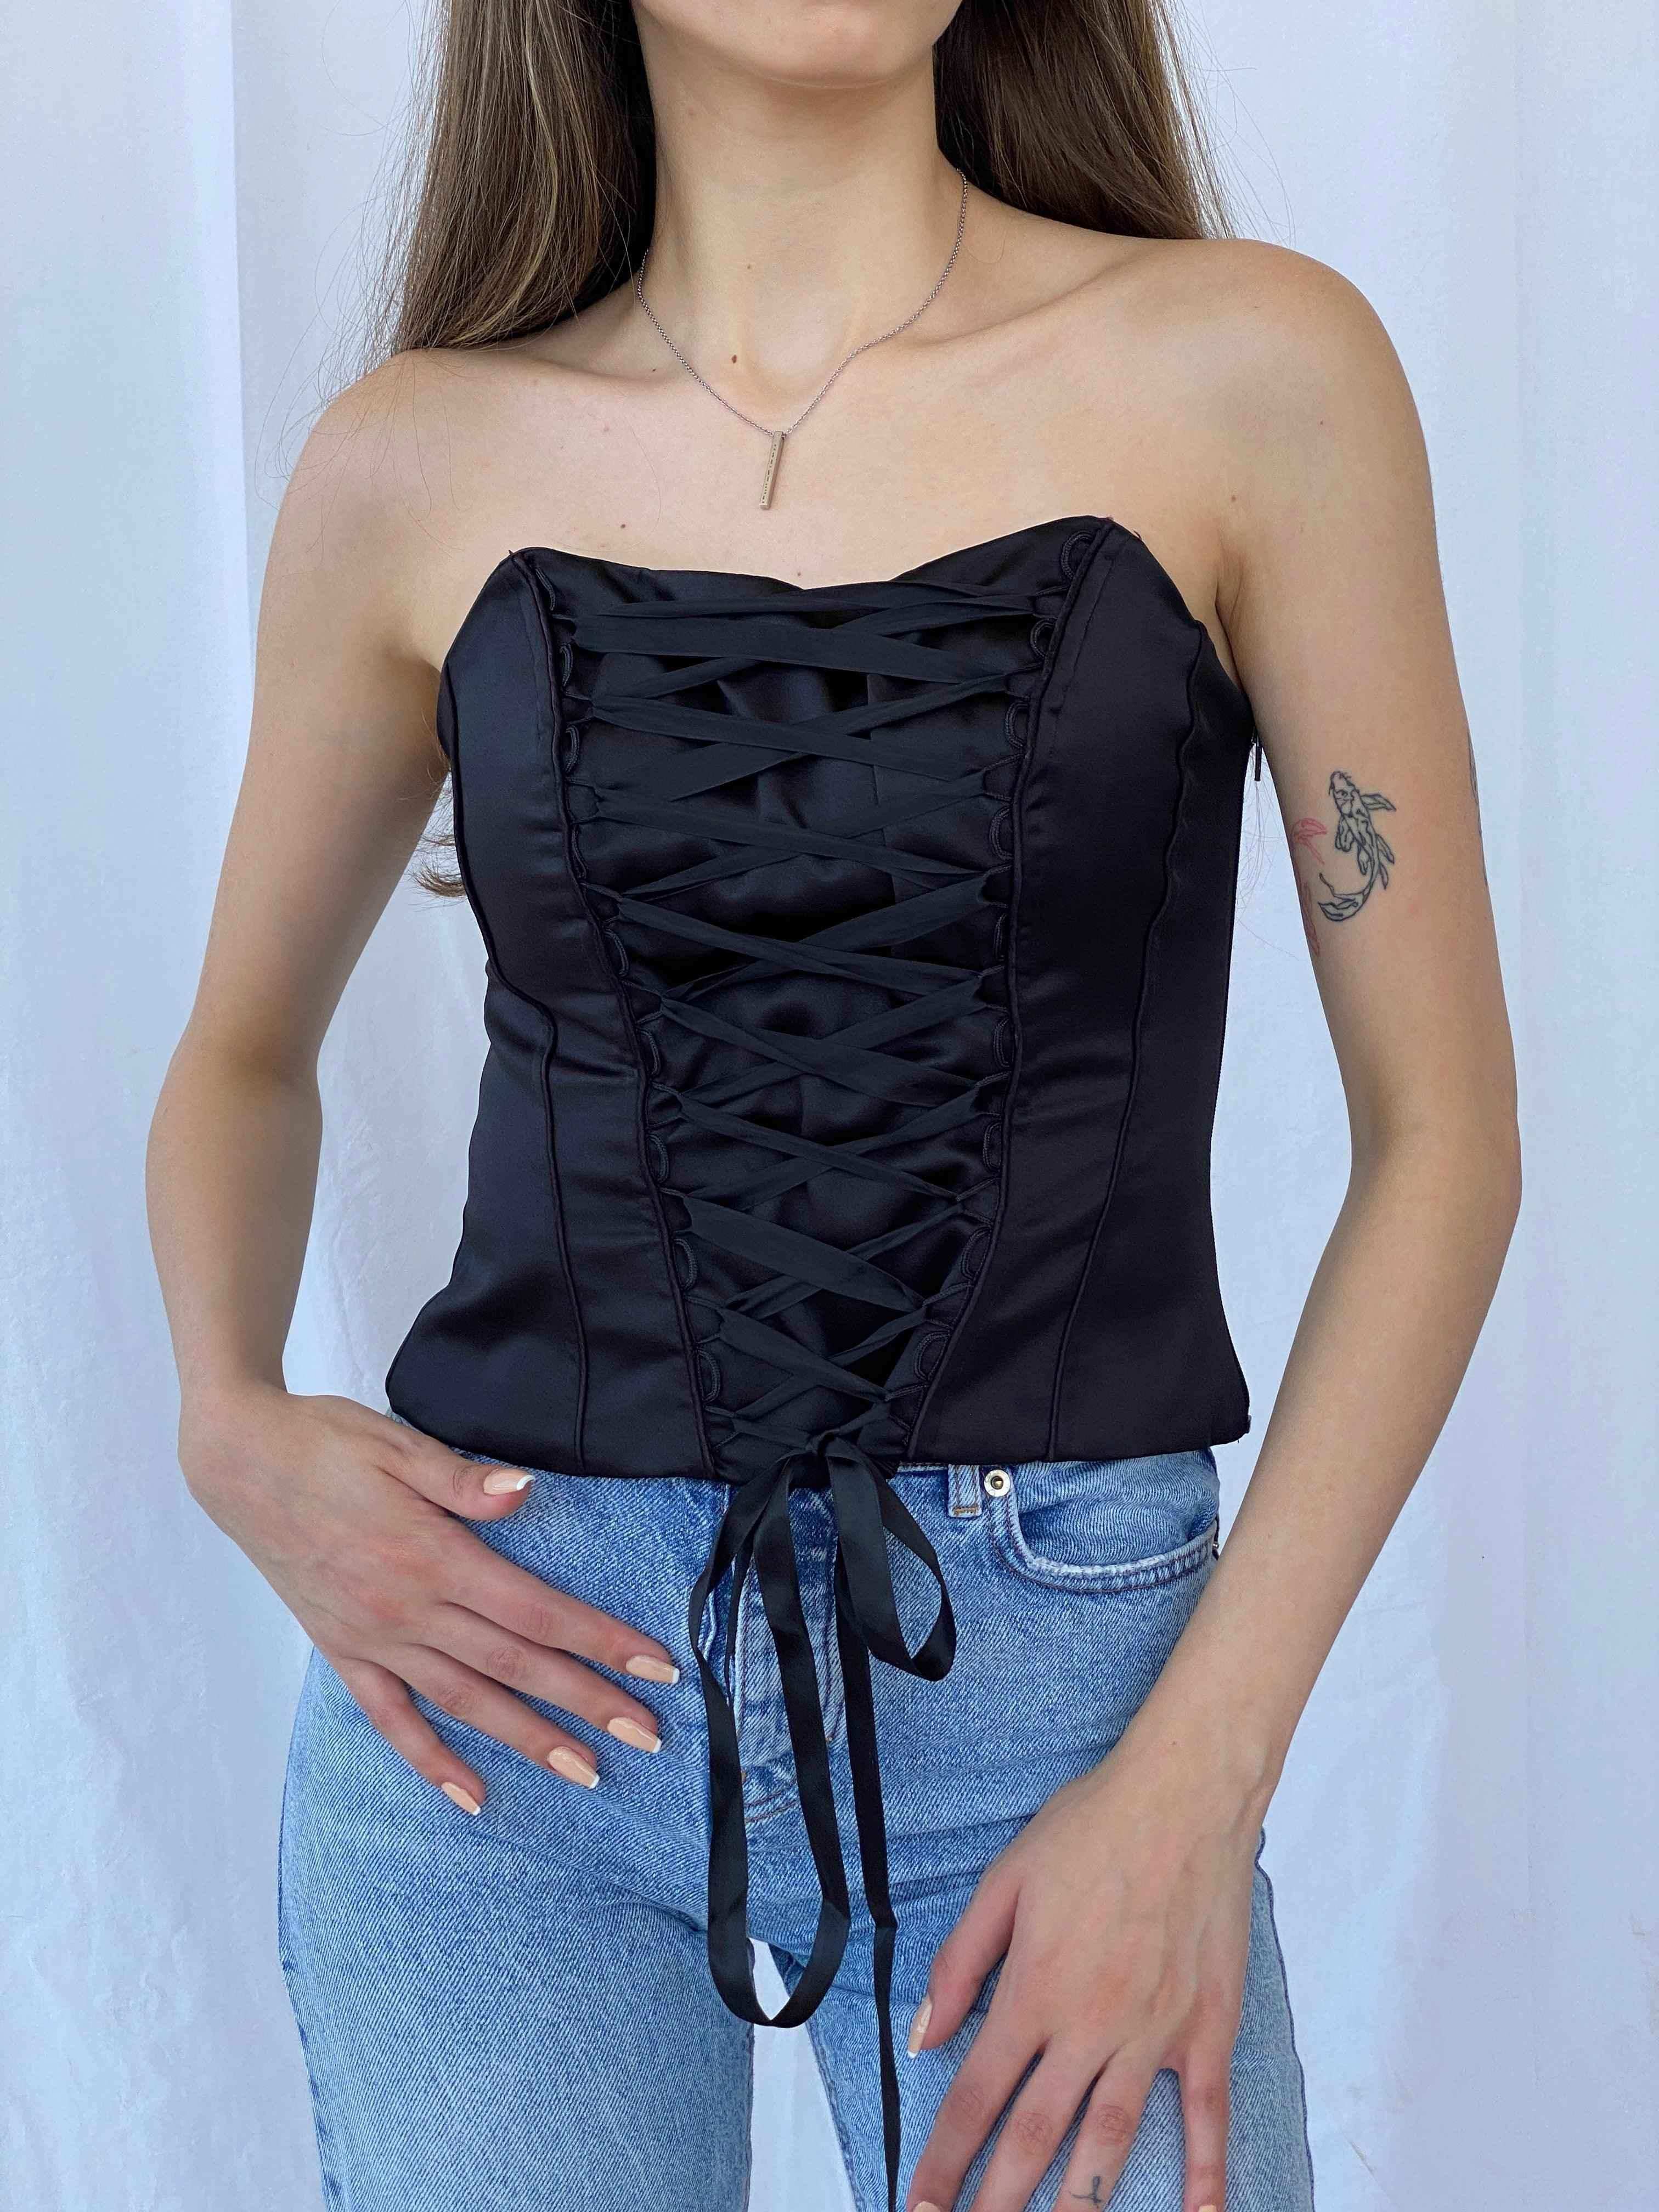 Vintage 90s black corset top with boned structure.